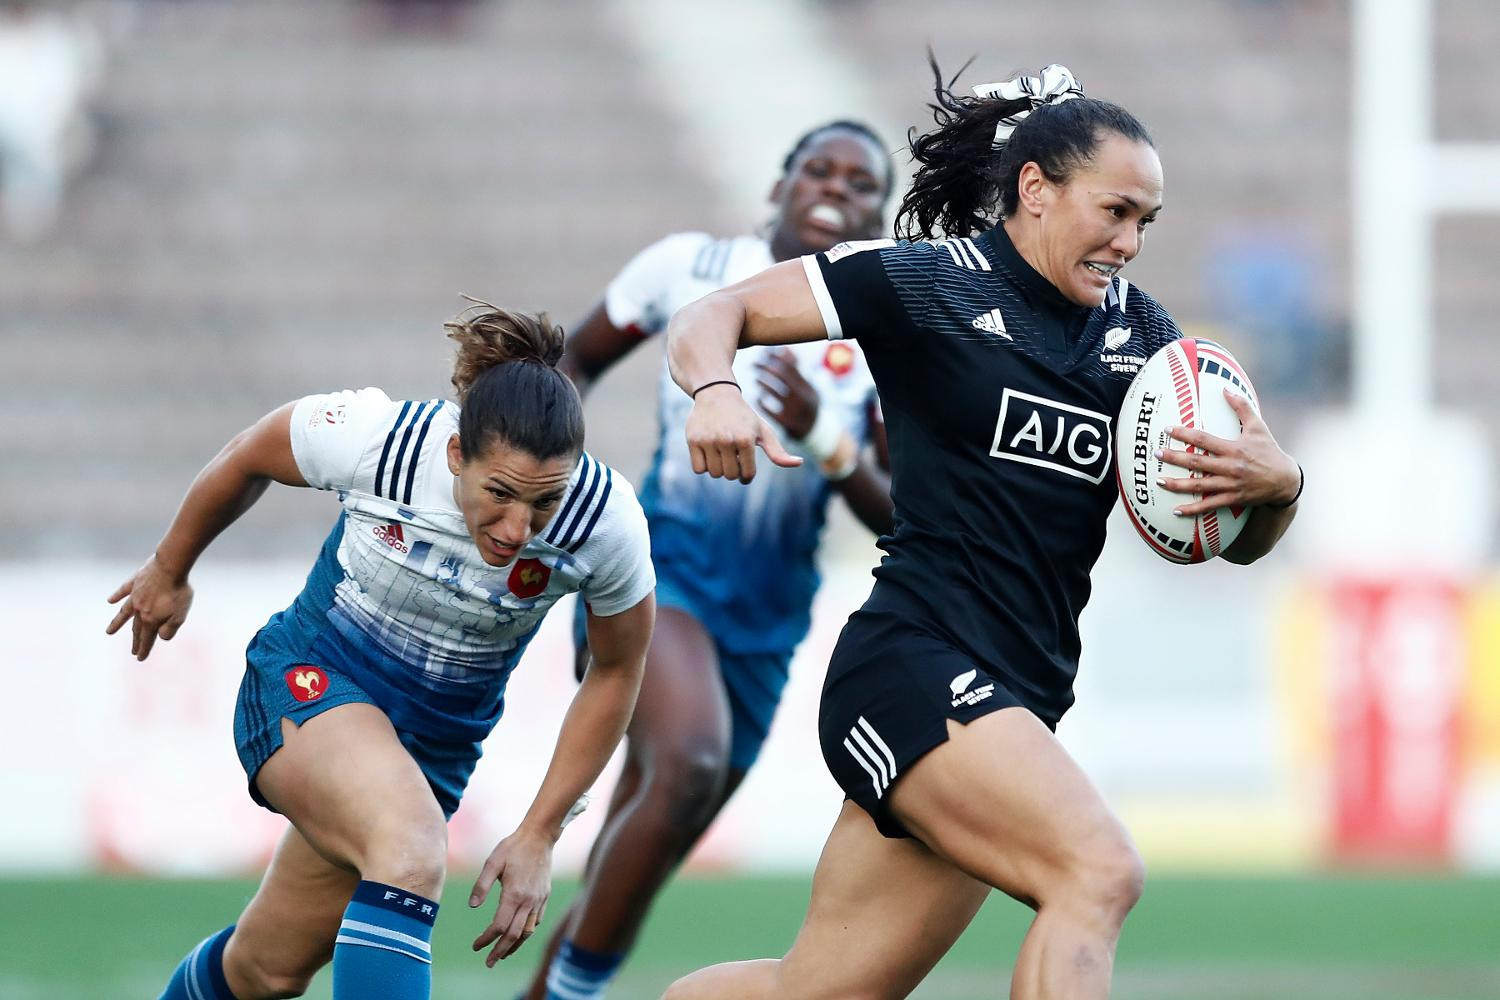 New Zealand continue Gold Coast 2018 form with 100 per cent record on opening day of Kitakyushu World Rugby Women's Sevens Series